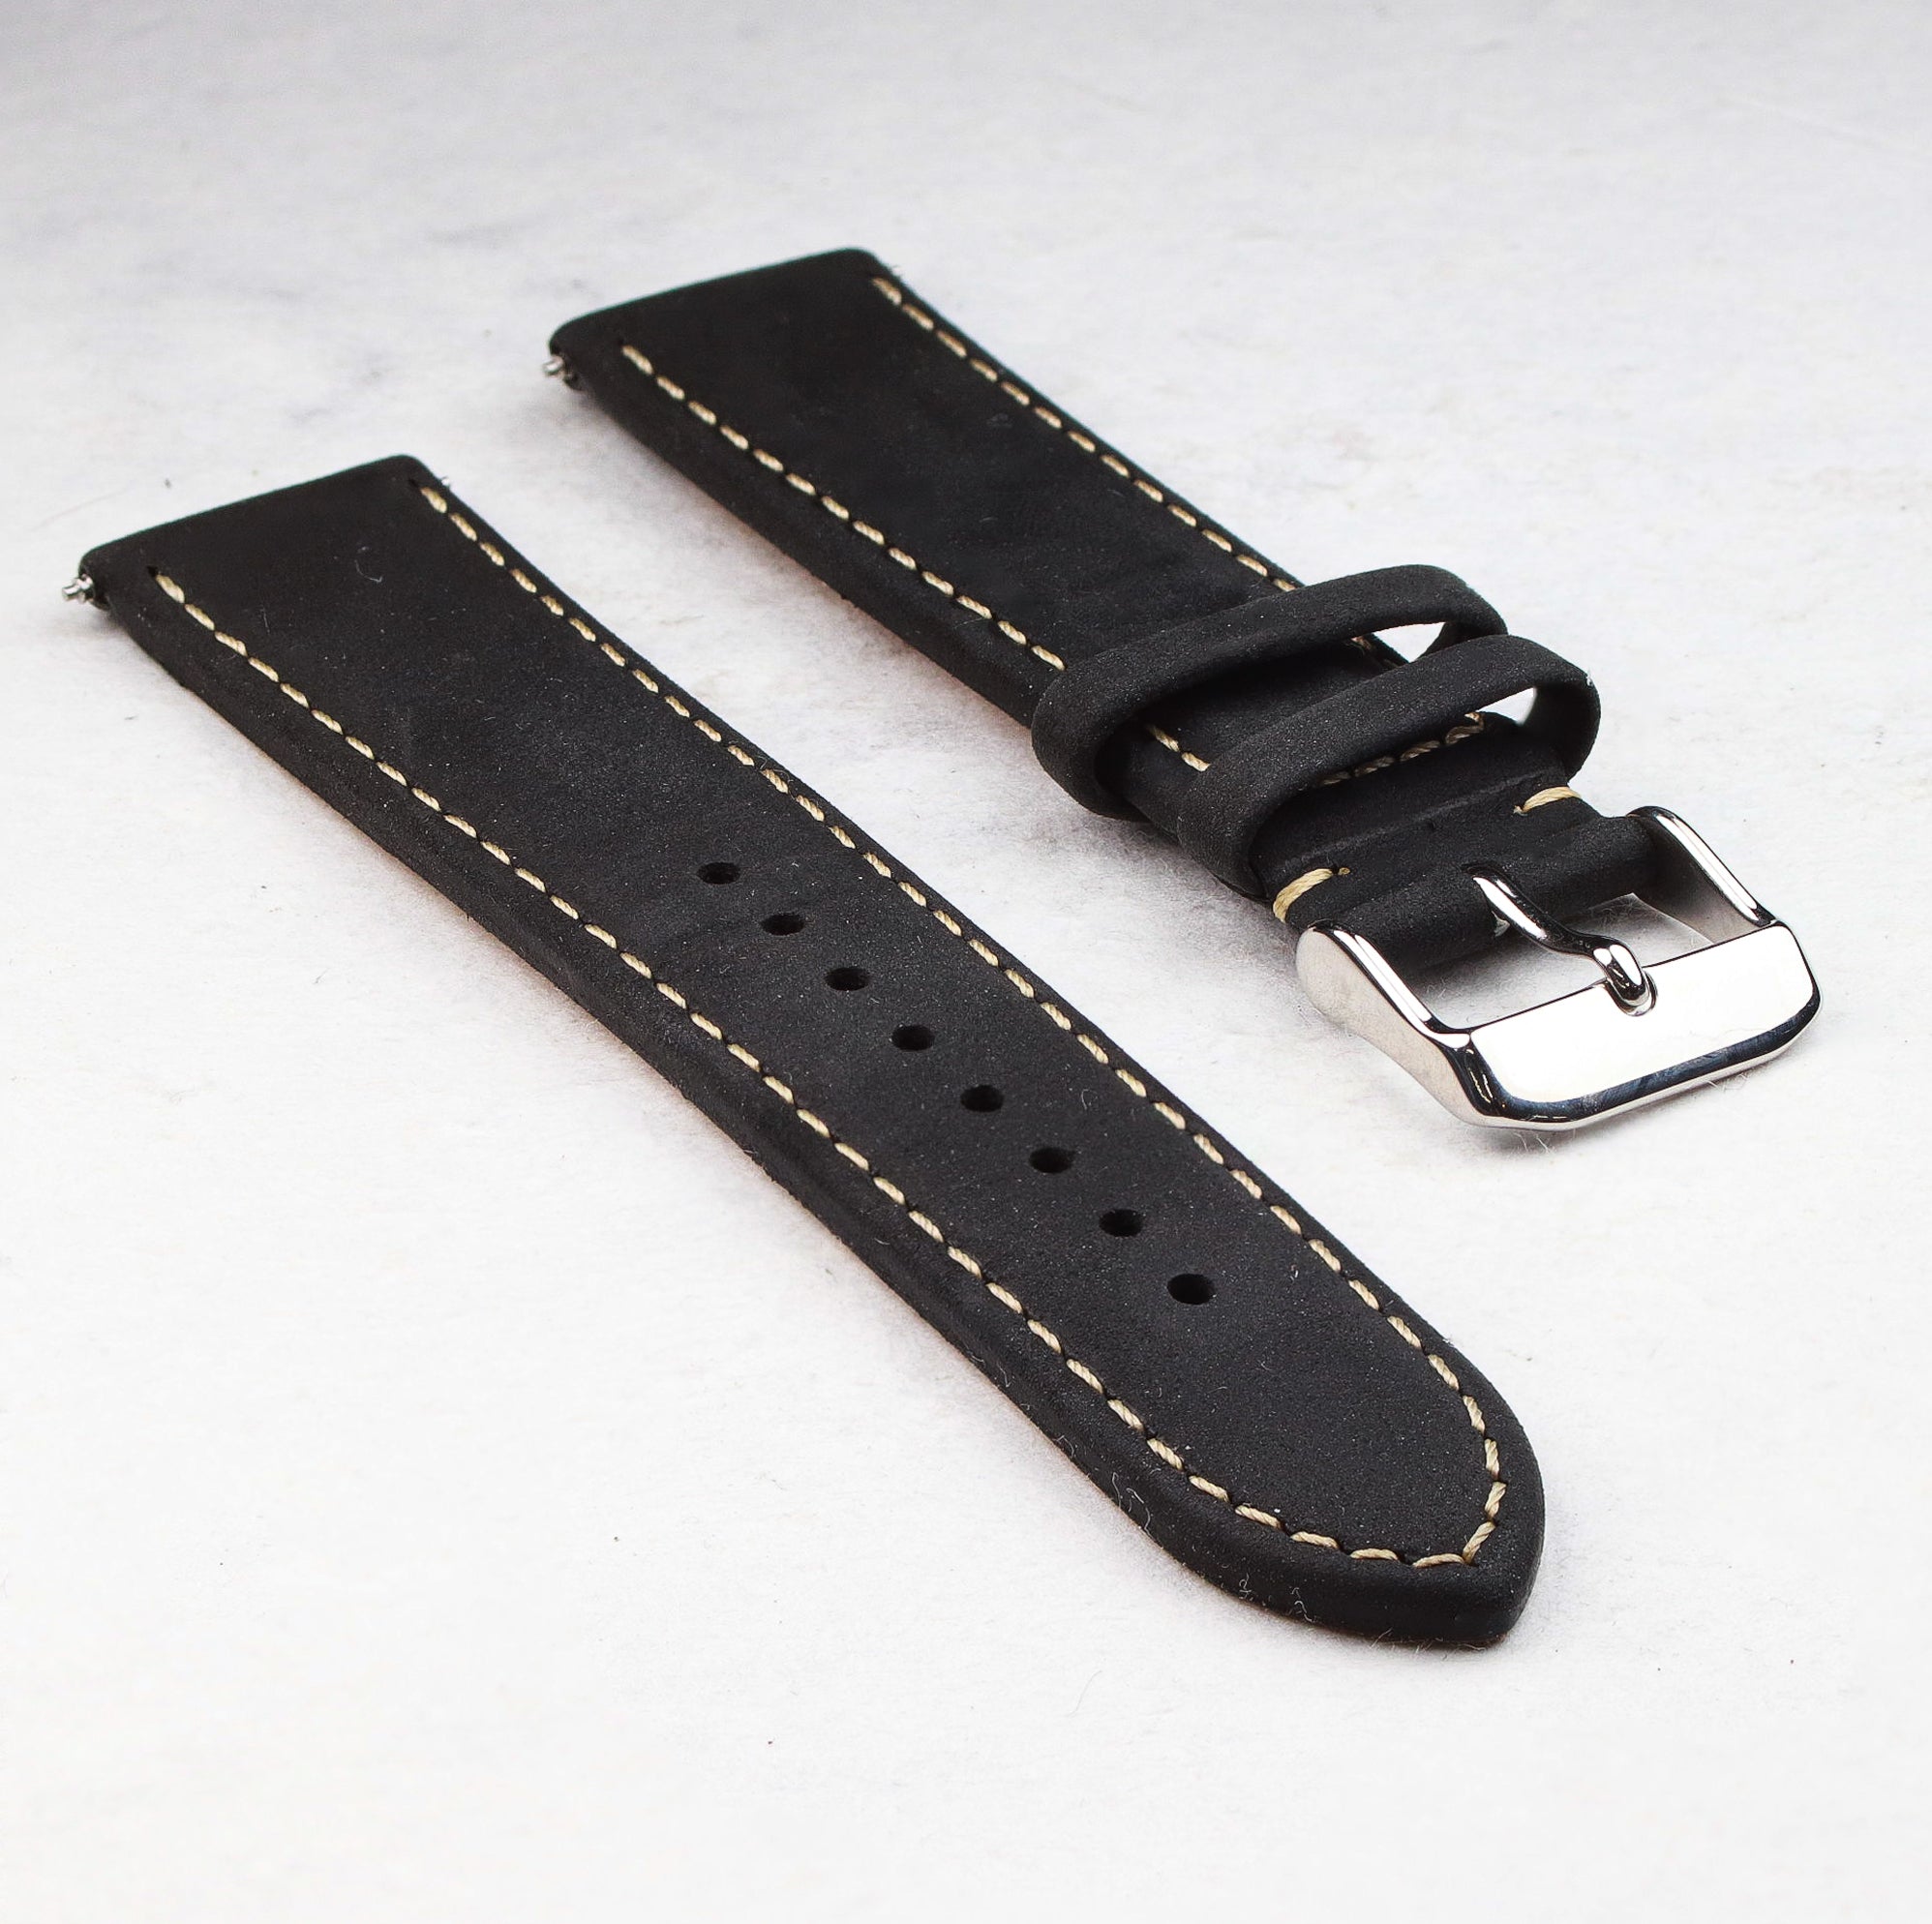 Suade Leather Strap - Wancher Watch Wancher Watch Black Wancher Watch Suade Leather Strap {{ Automatic Watch {{ Watch }} }} {{ Japan }} Genuine Leather Strap with Silver Pin Closure by Wancher